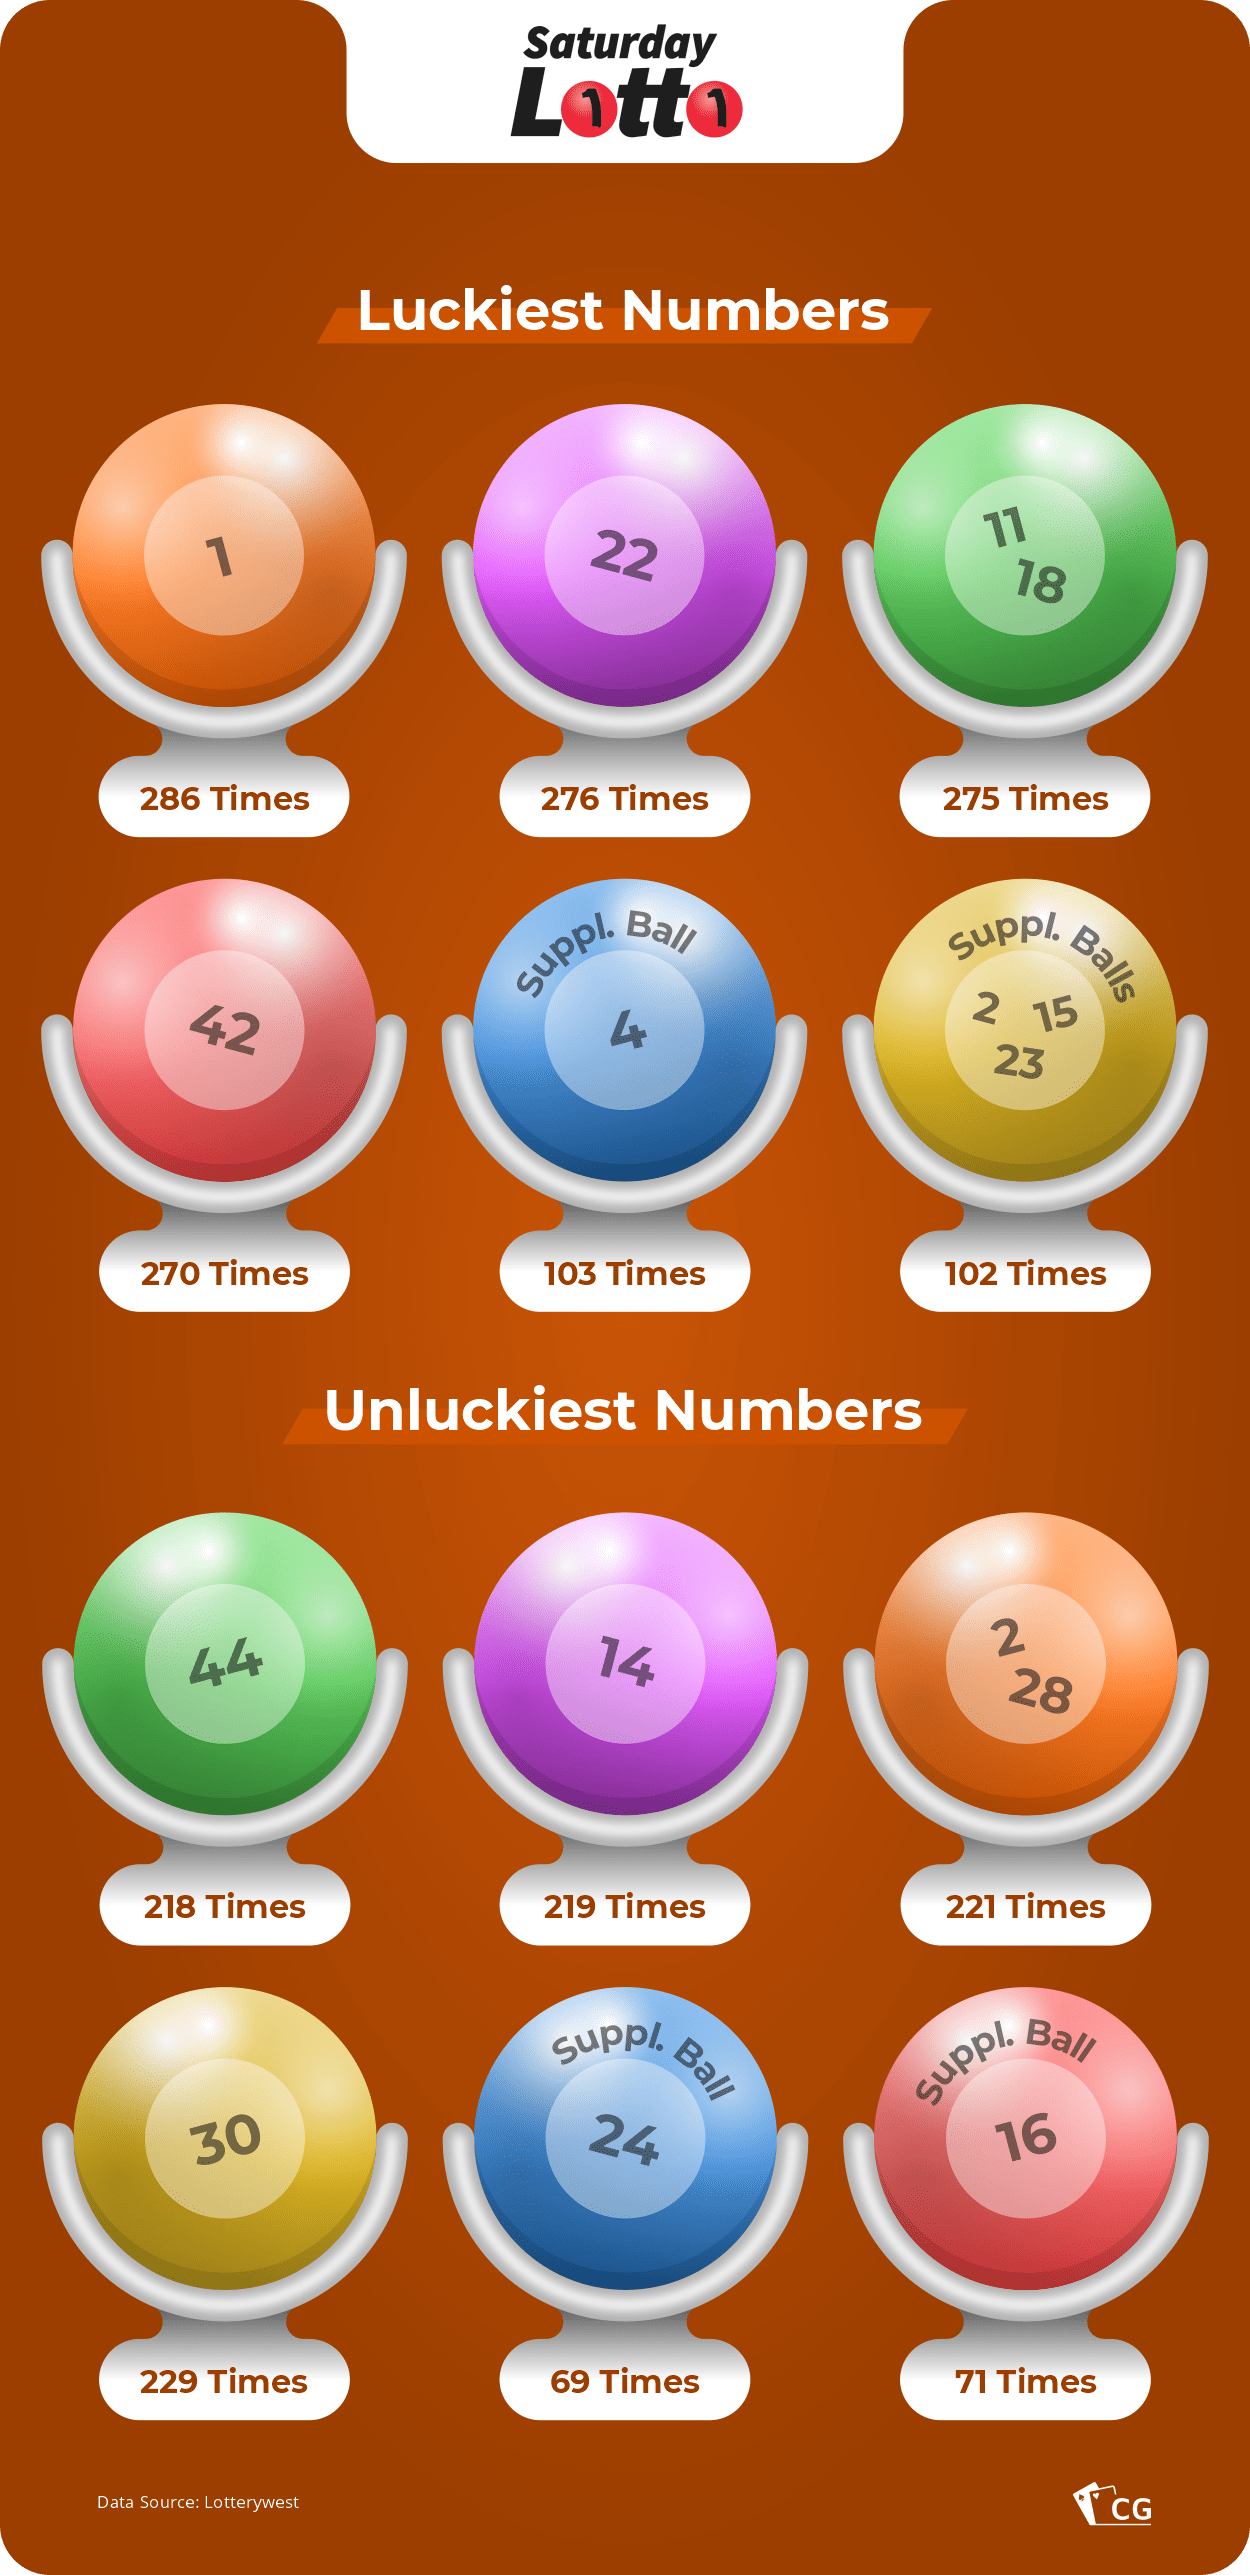 what are the luckiest lotto numbers in australia